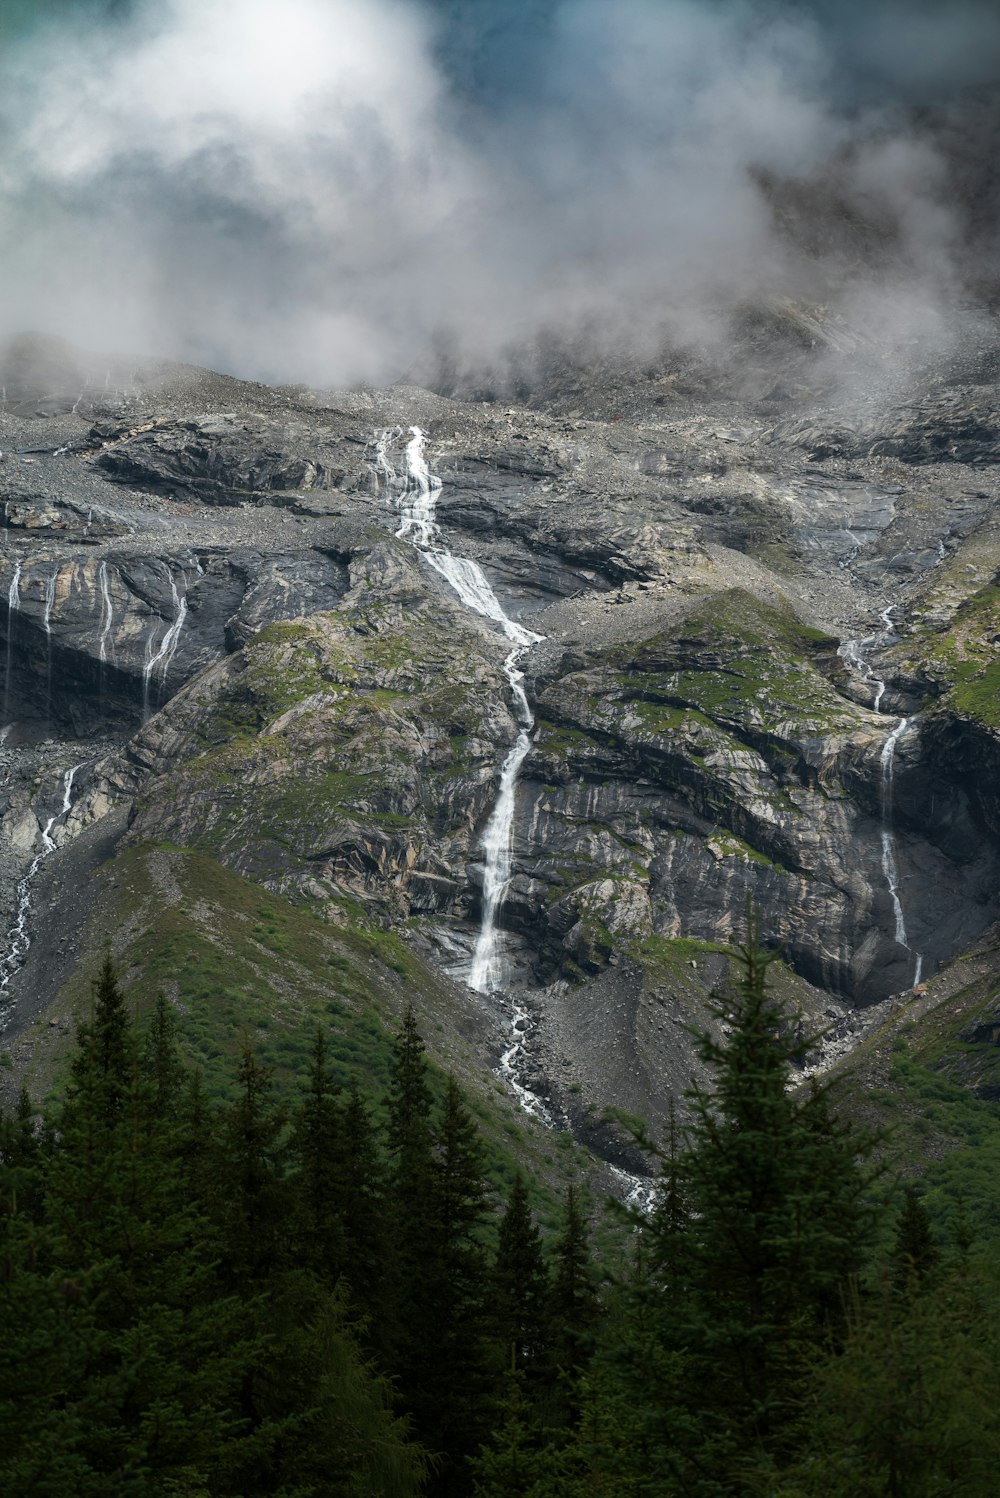 a view of a mountain with a waterfall coming out of it